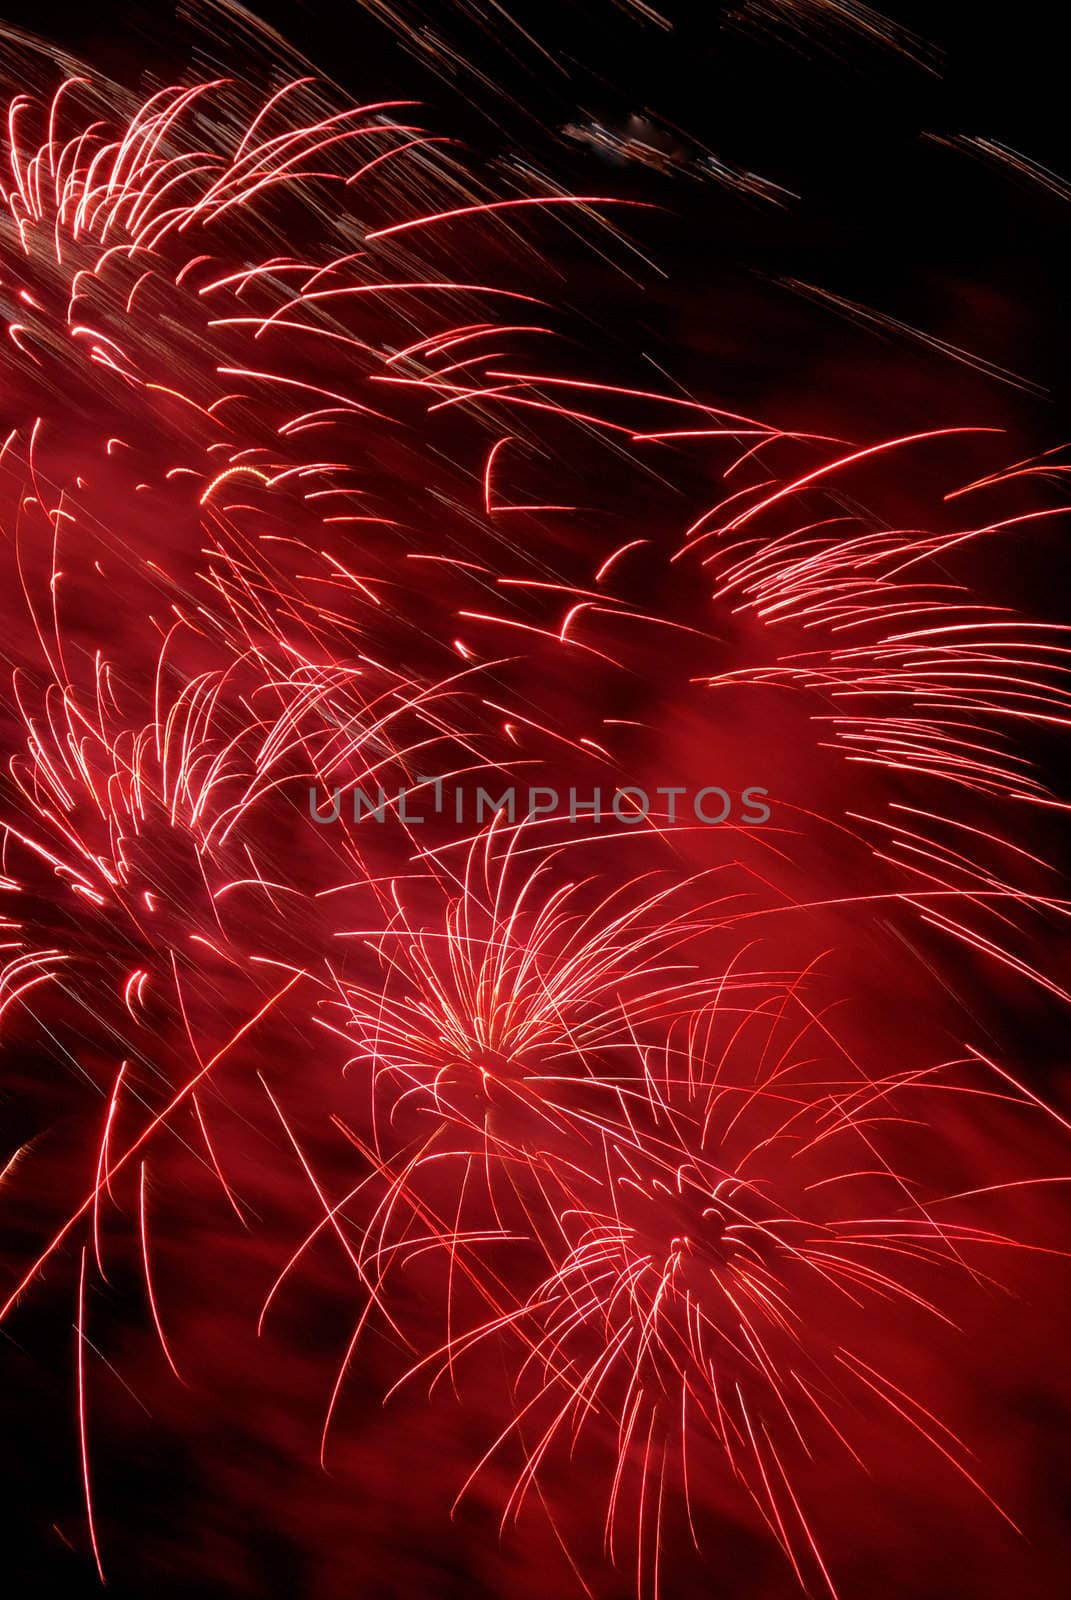 Bright red fireworks